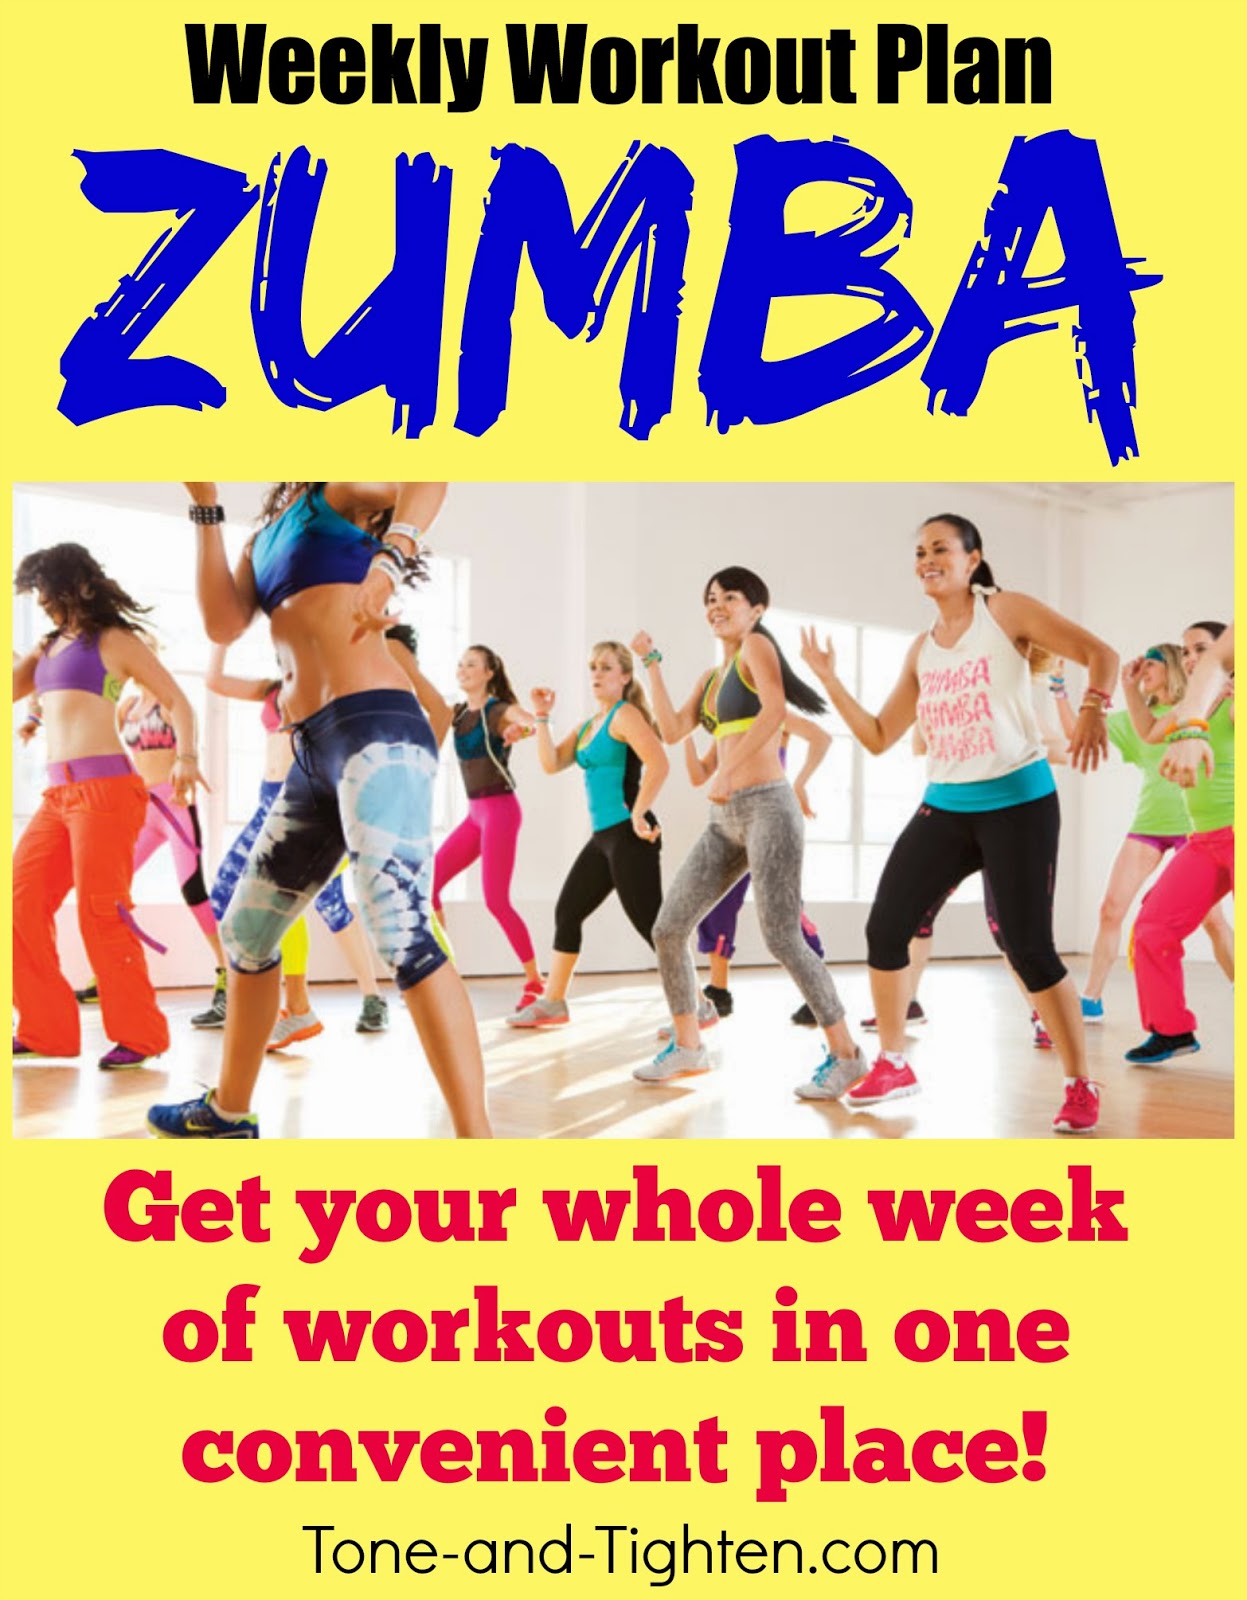 Weekly Workout Plan – The best free Zumba videos to Tone and Tighten